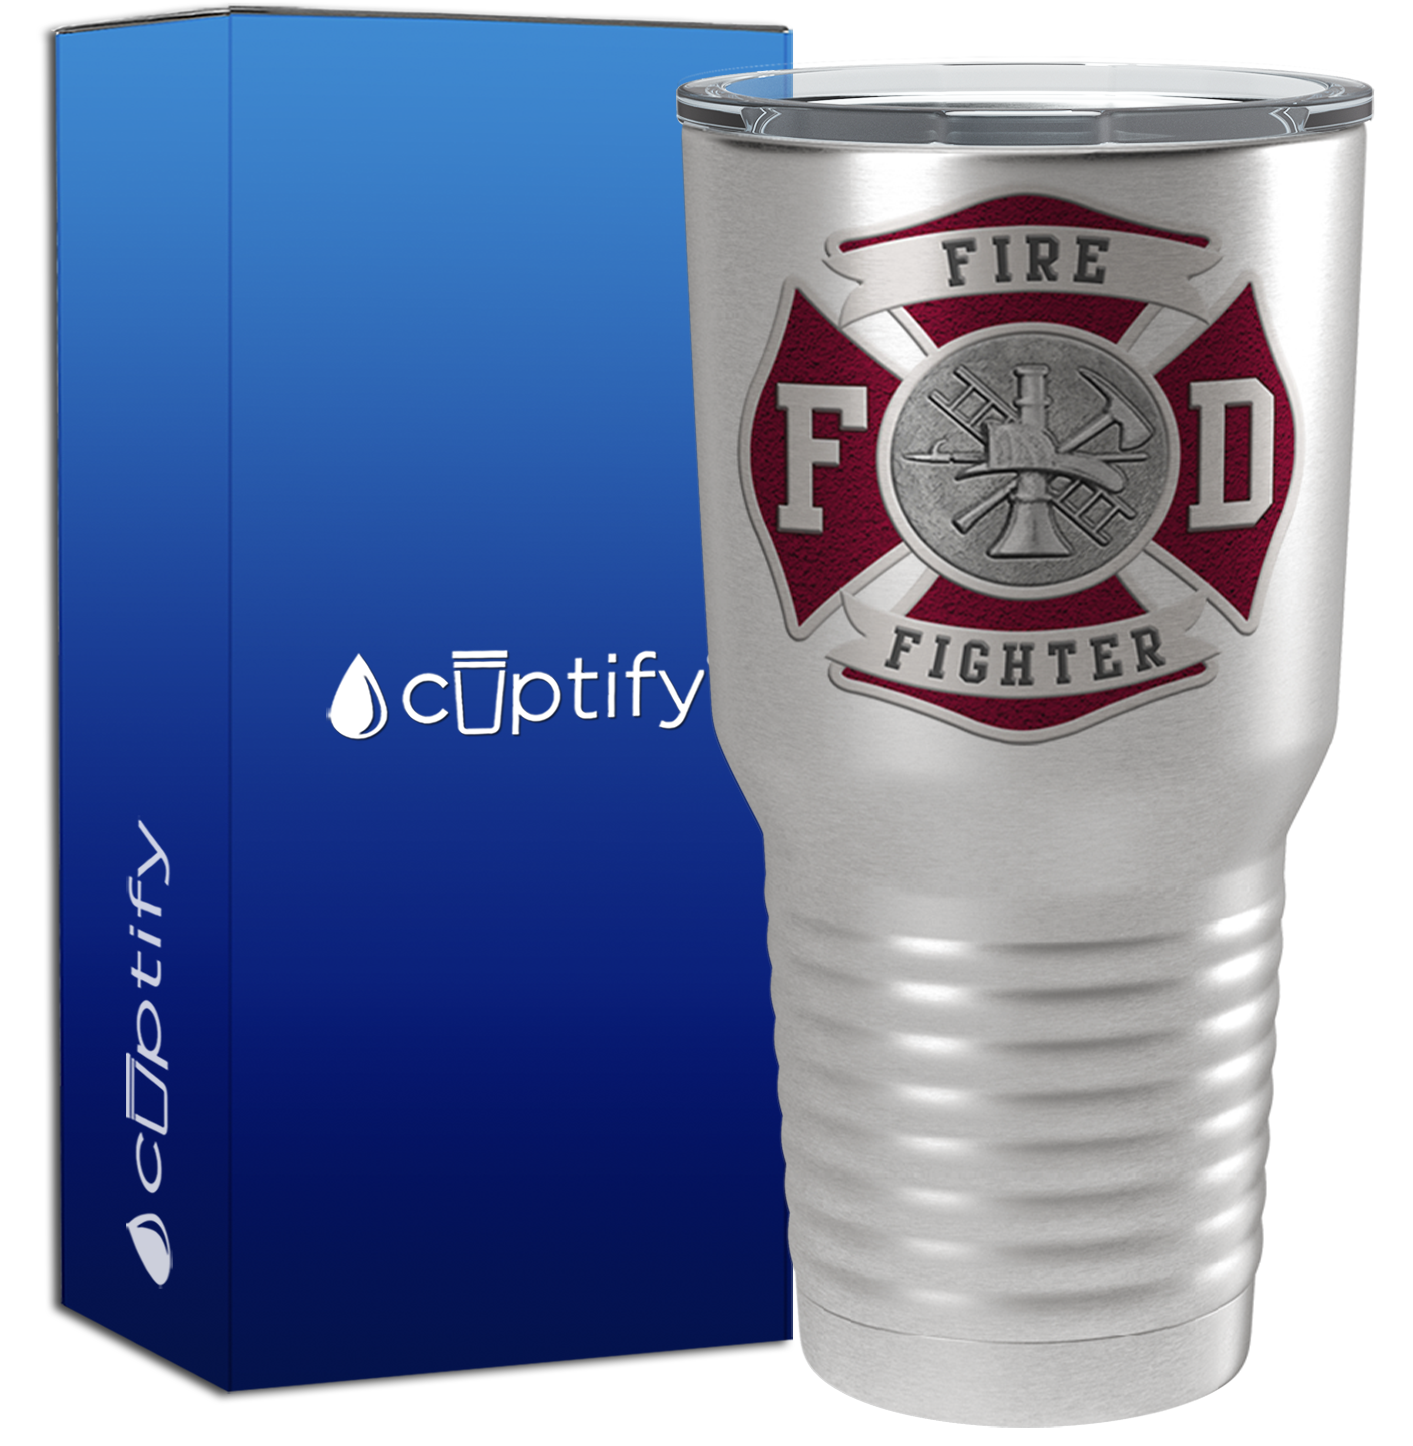 Red Fire Department Badge on Stainless 30oz Firefighter Tumbler